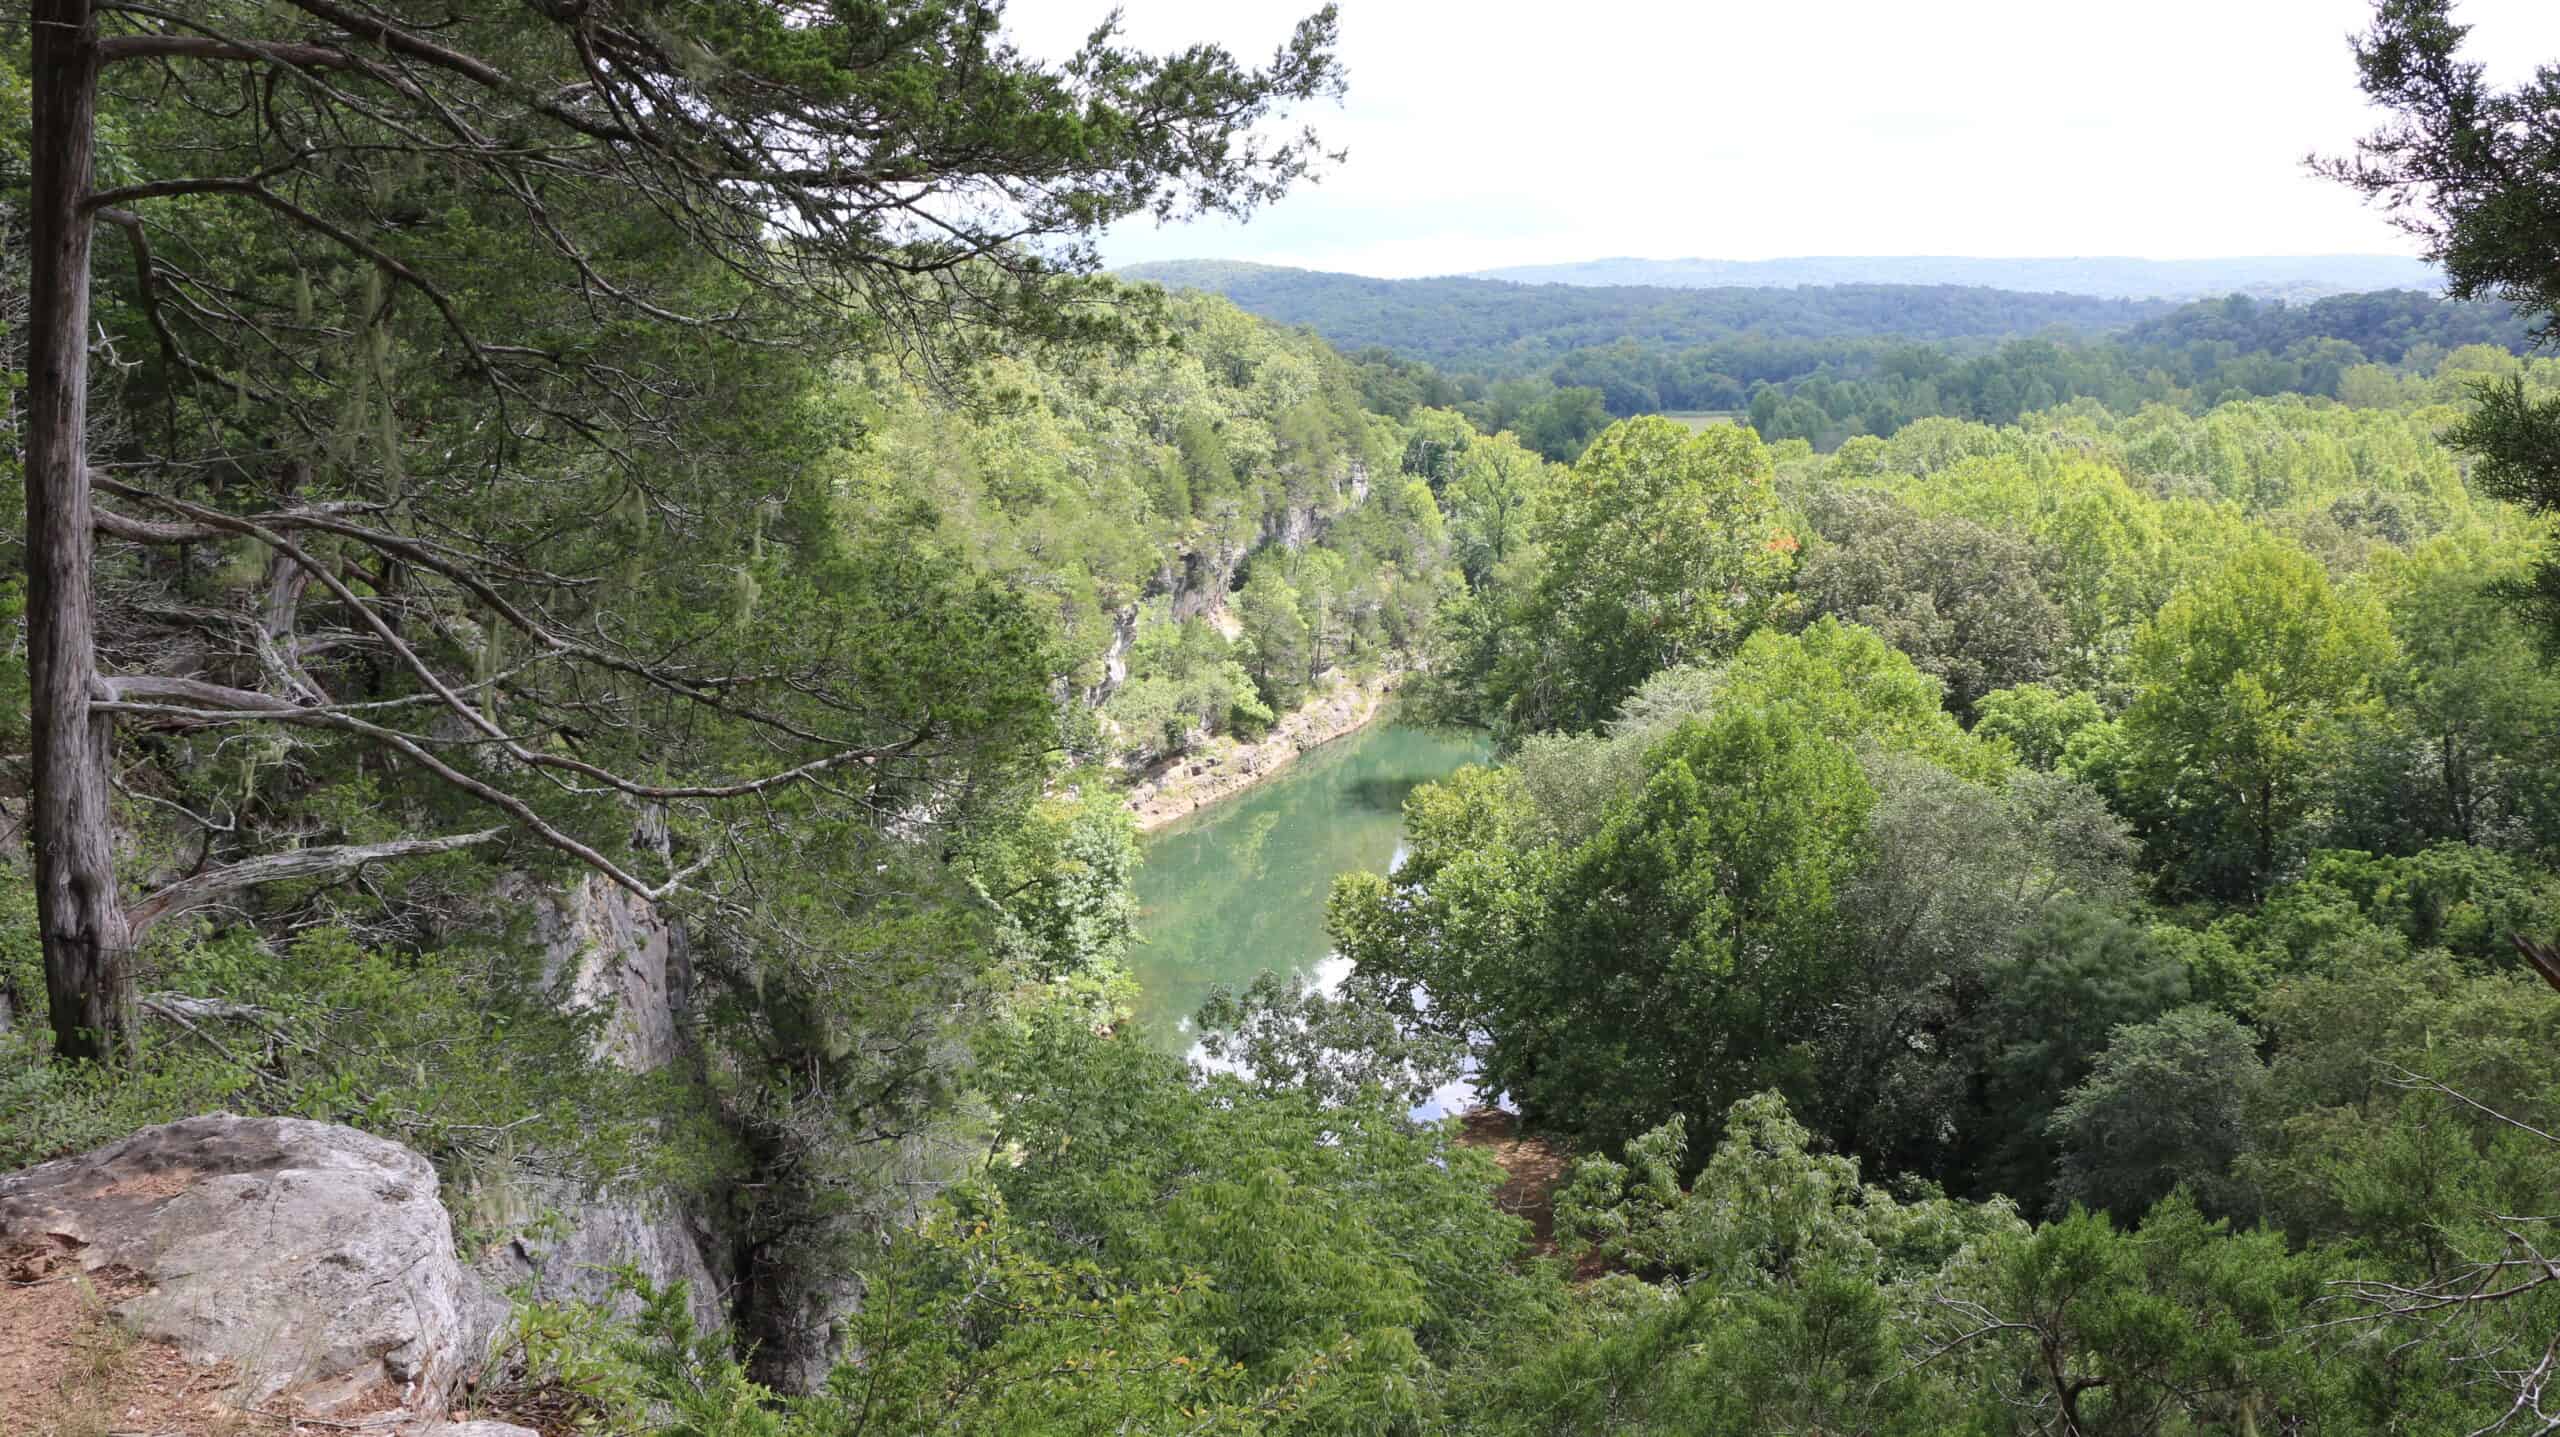 A view of the Buffalo River from Goat Bluff Overlook